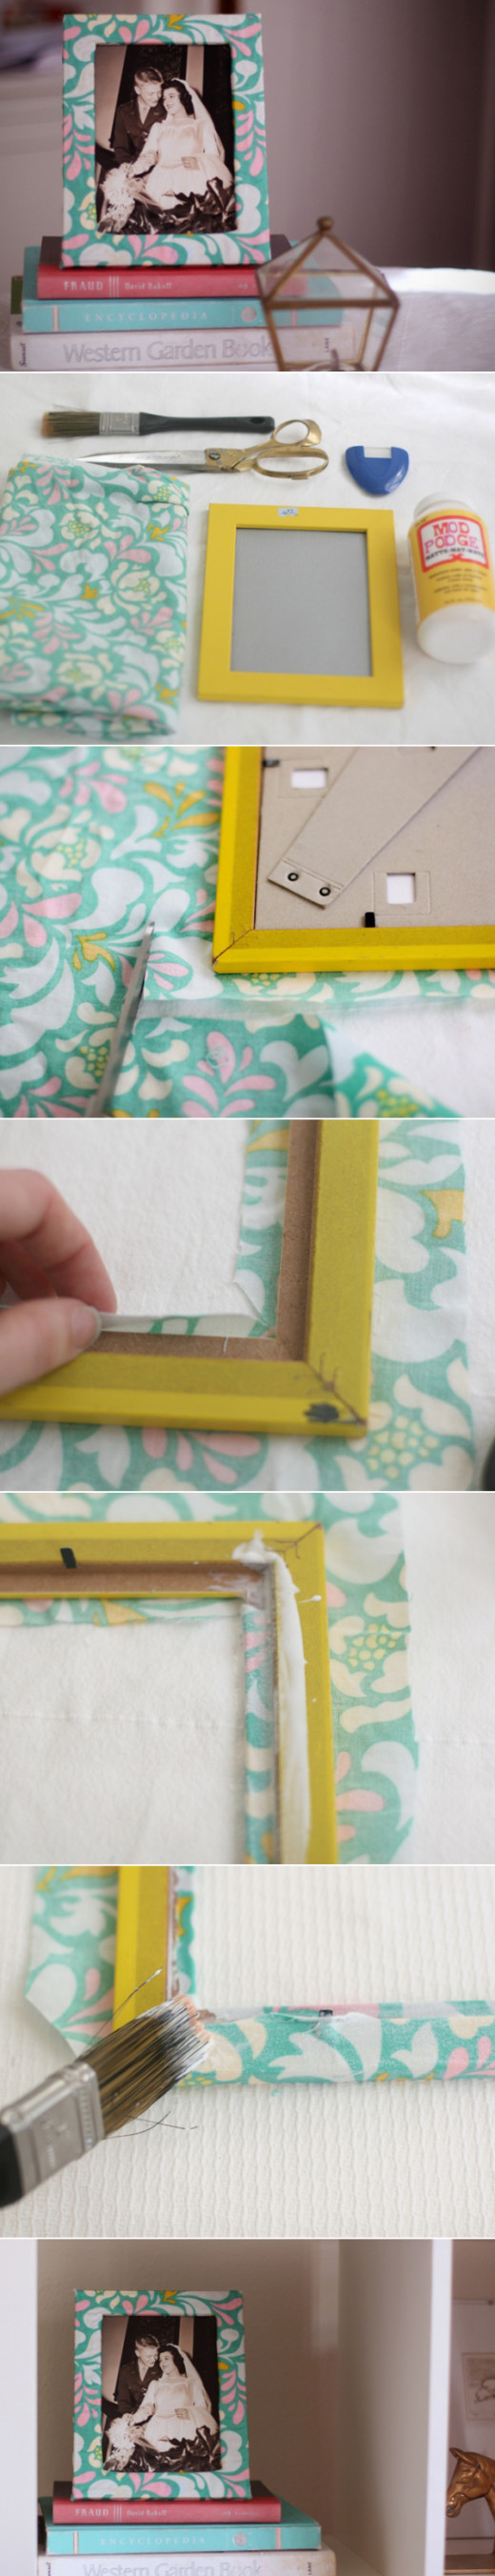 DIY: Fabric Covered Frame | From momtastic